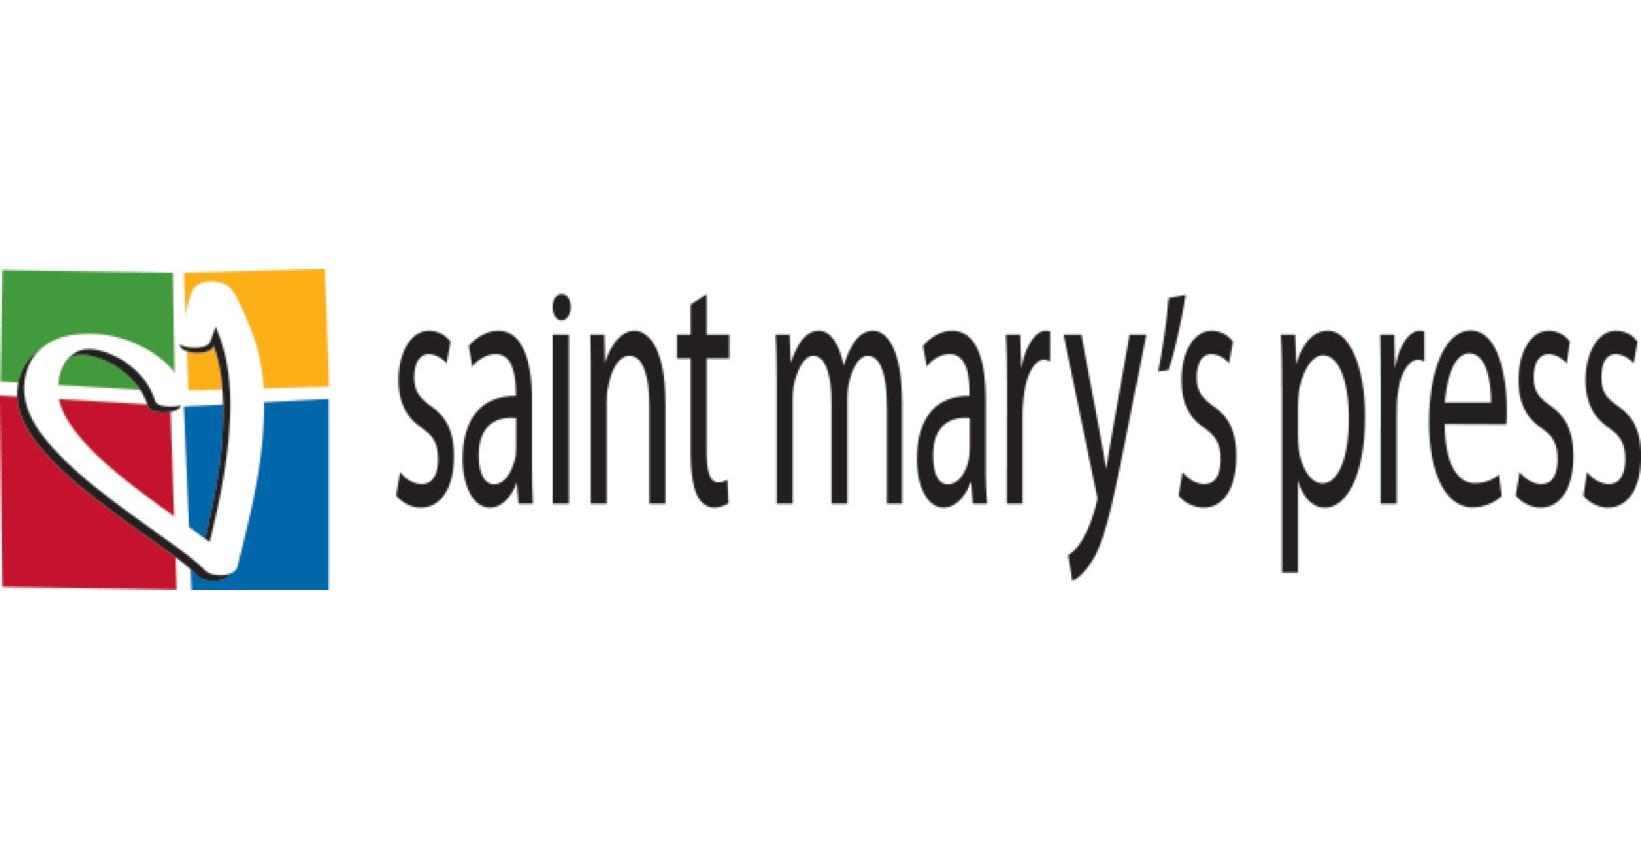 Saint Mary's Press & Georgetown Researchers Release Two-Year National Study On Disaffiliation In Young Catholics